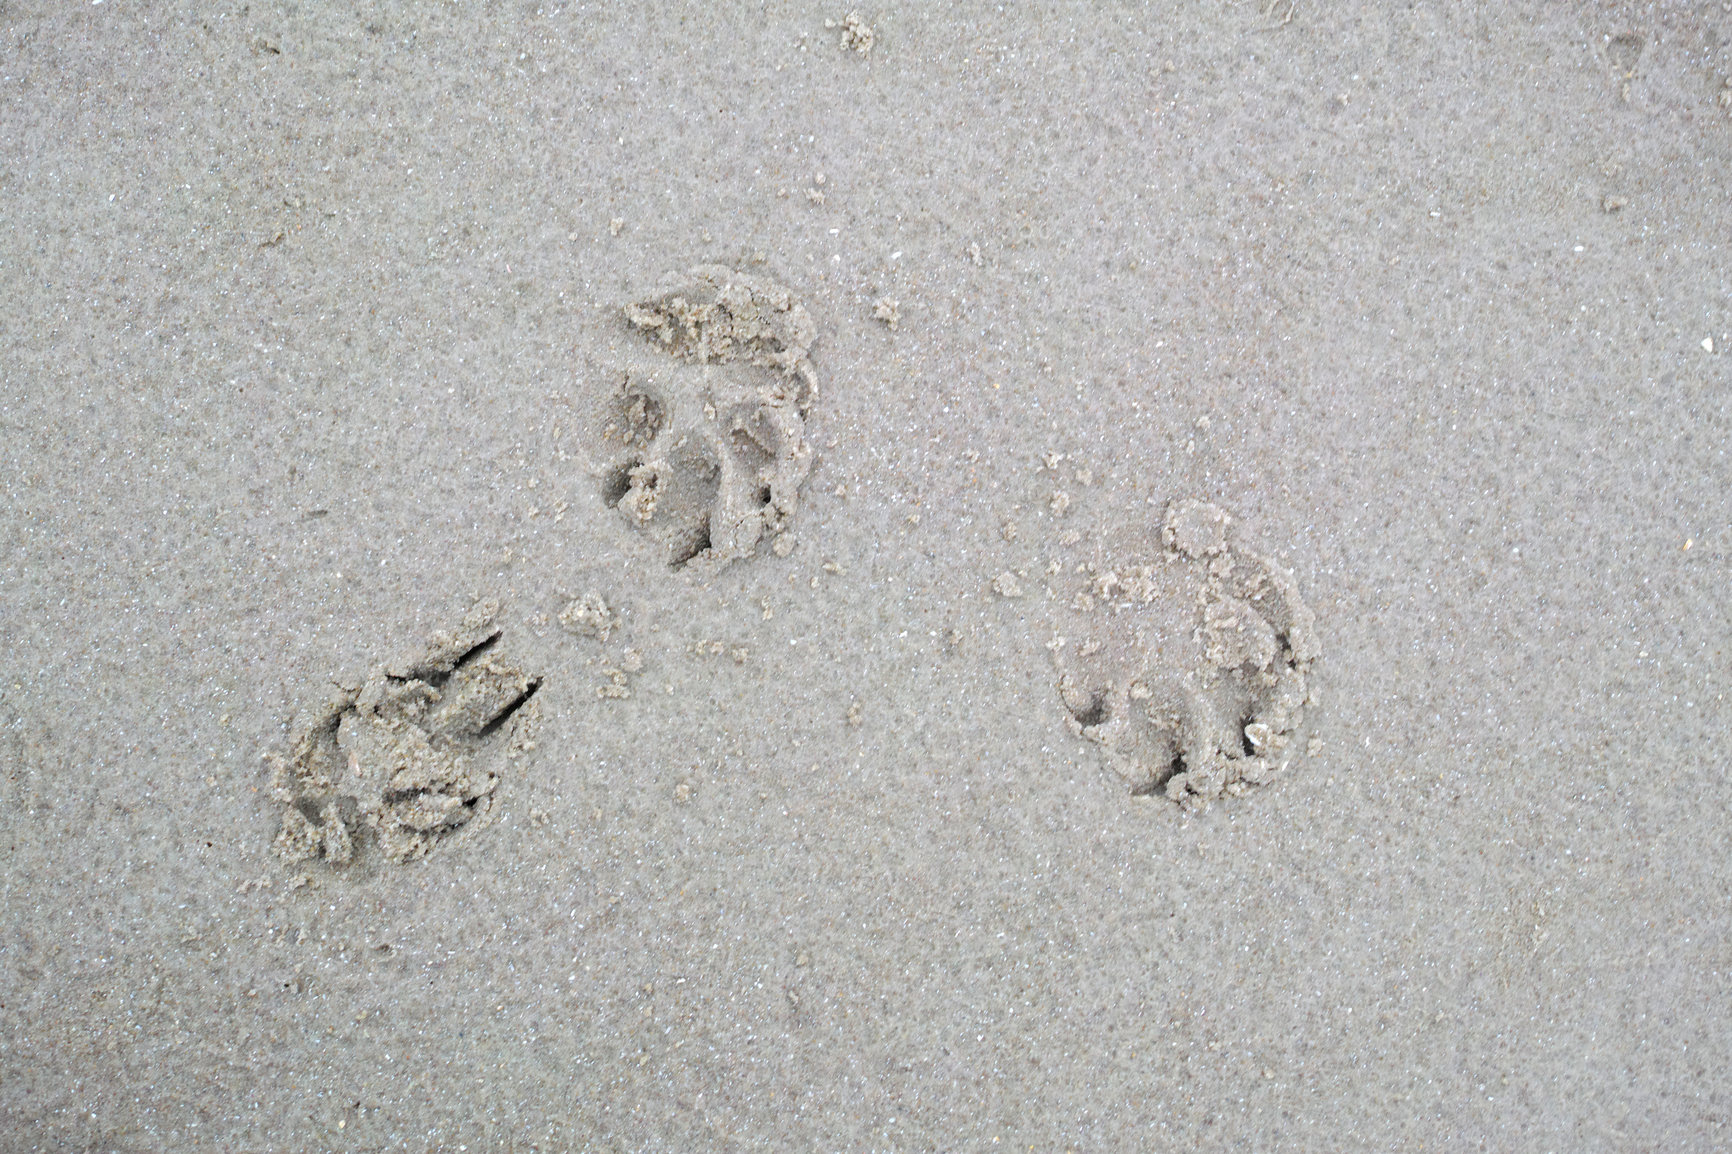 Buy stock photo Closeup above of a dog or cat footprint on the shore of the beach. Tiny cute little animal paw shape prints engraved in the wet and moist sand outside during a summer day at the beach or lake. 